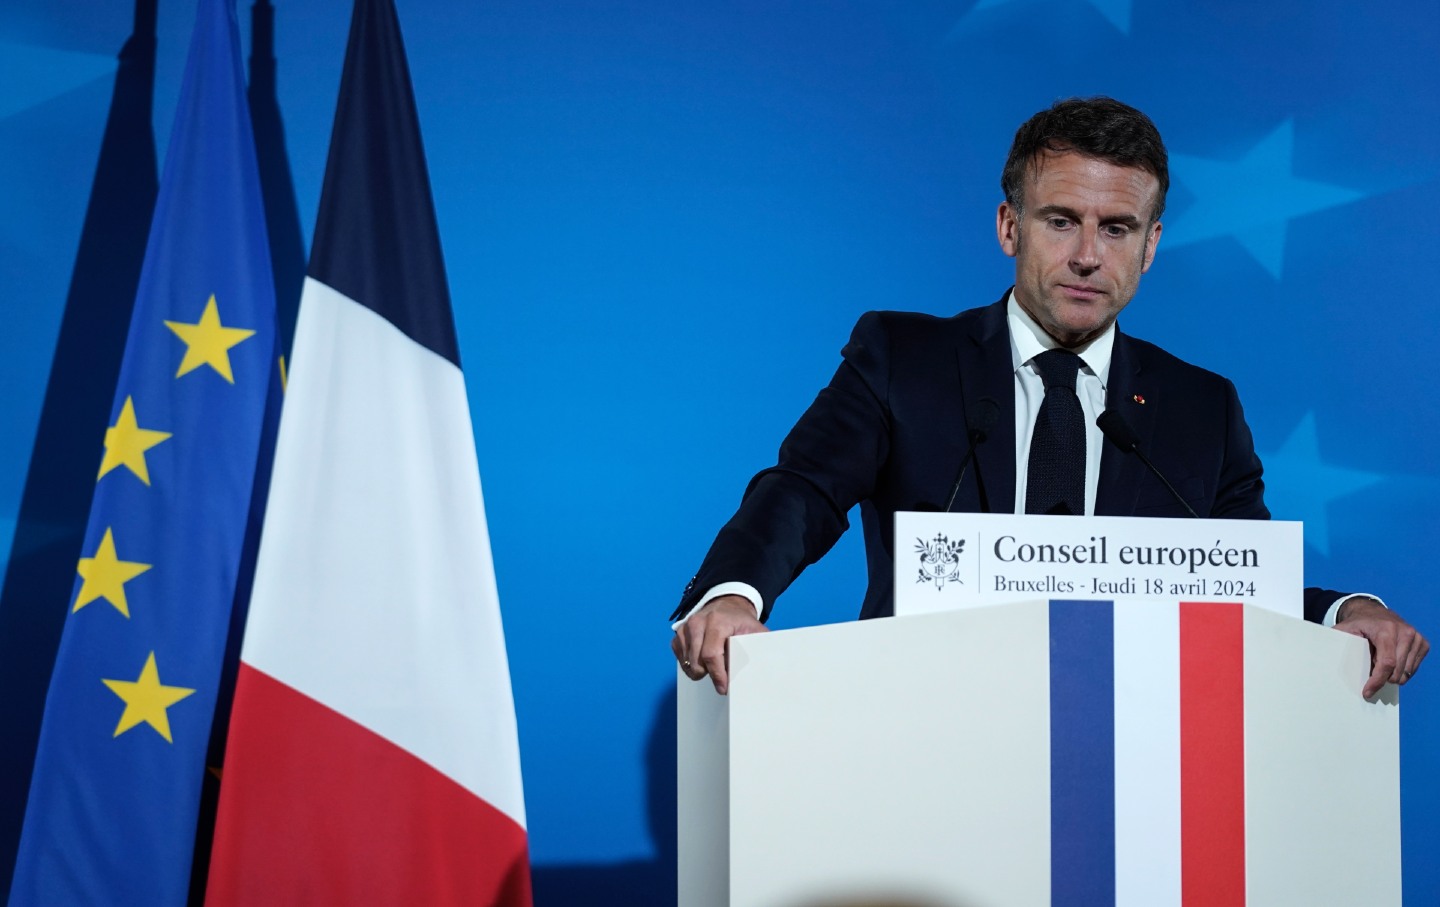 Emmanuel Macron, France's president, pauses during news conference following a Special European Council summit in Brussels, Belgium, on April 18, 2024. The European Union's waning clout is sounding alarm bells in Europe's capitals.